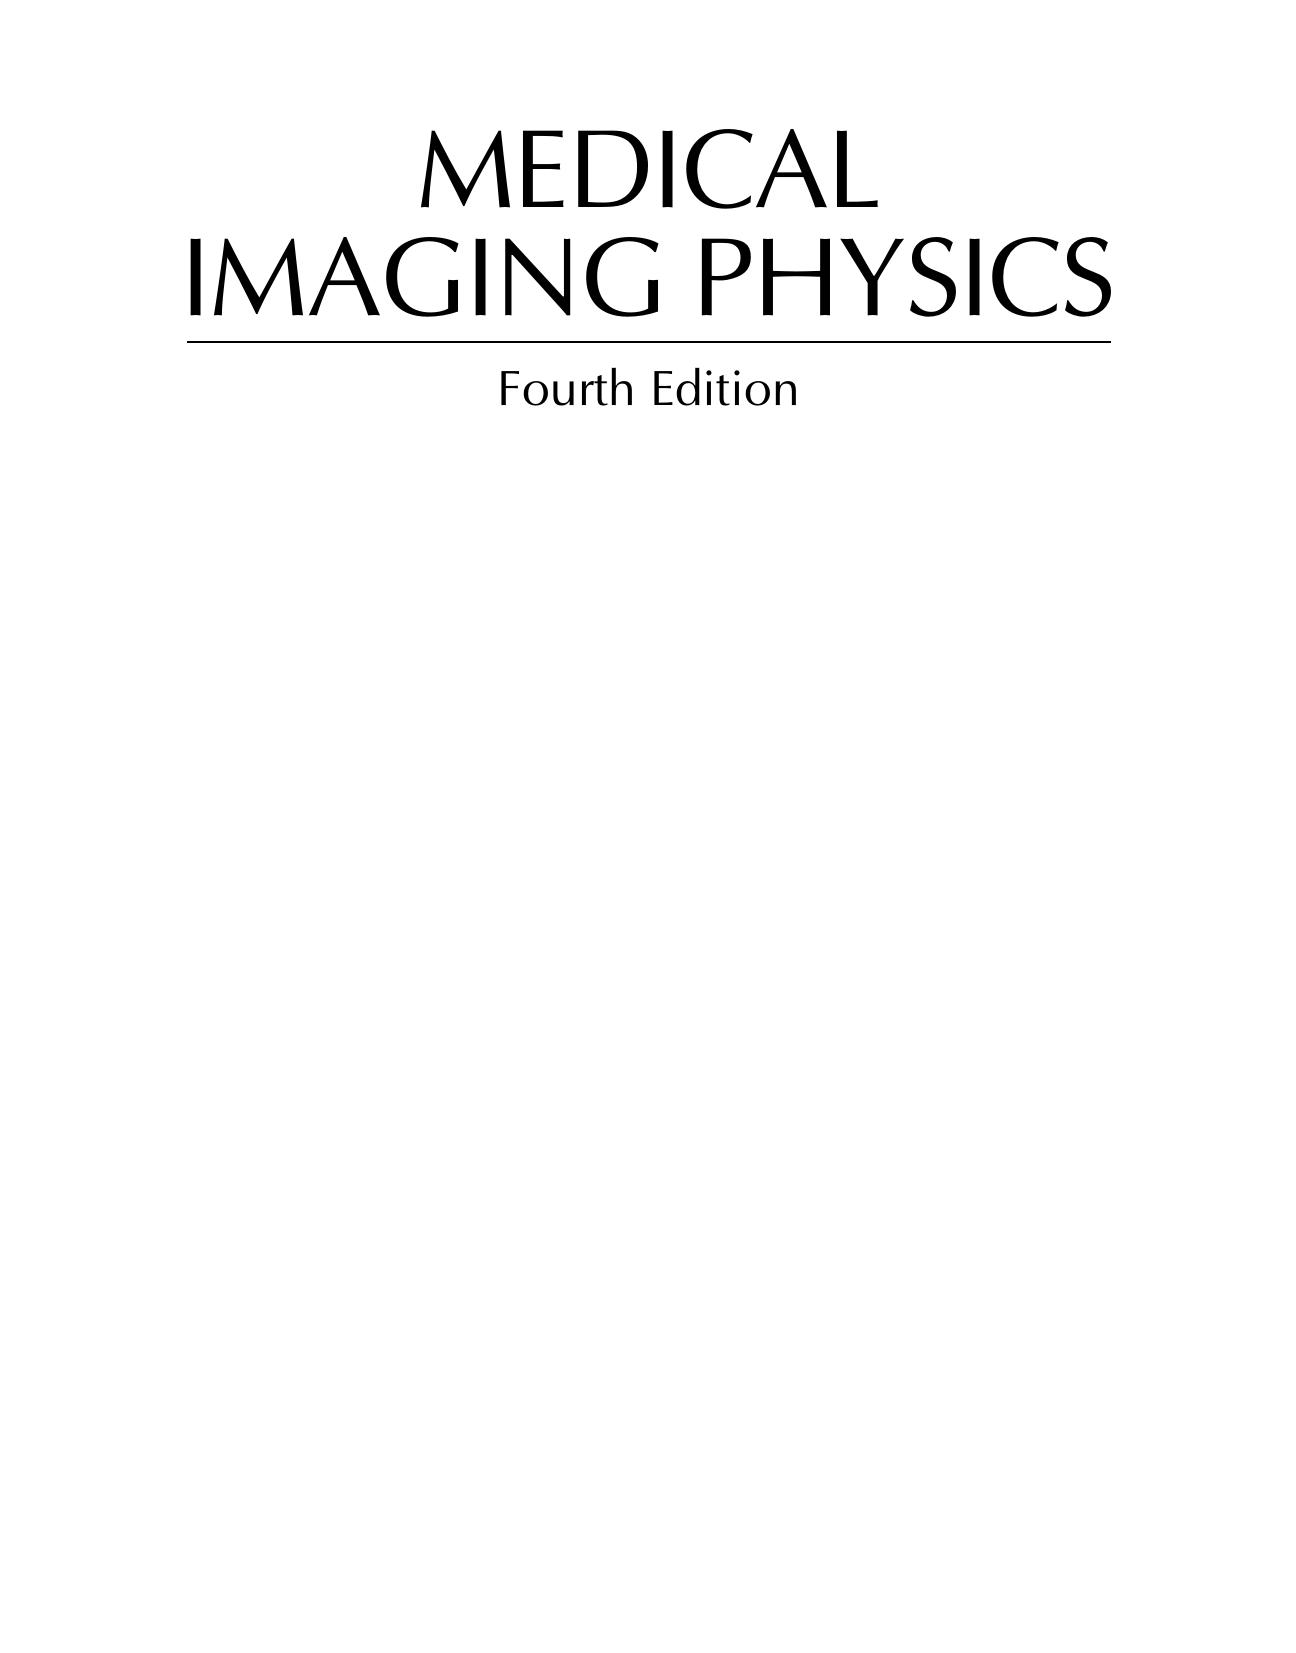 "Frontmatter". In: Medical Imaging Physics (Fourth Edition)